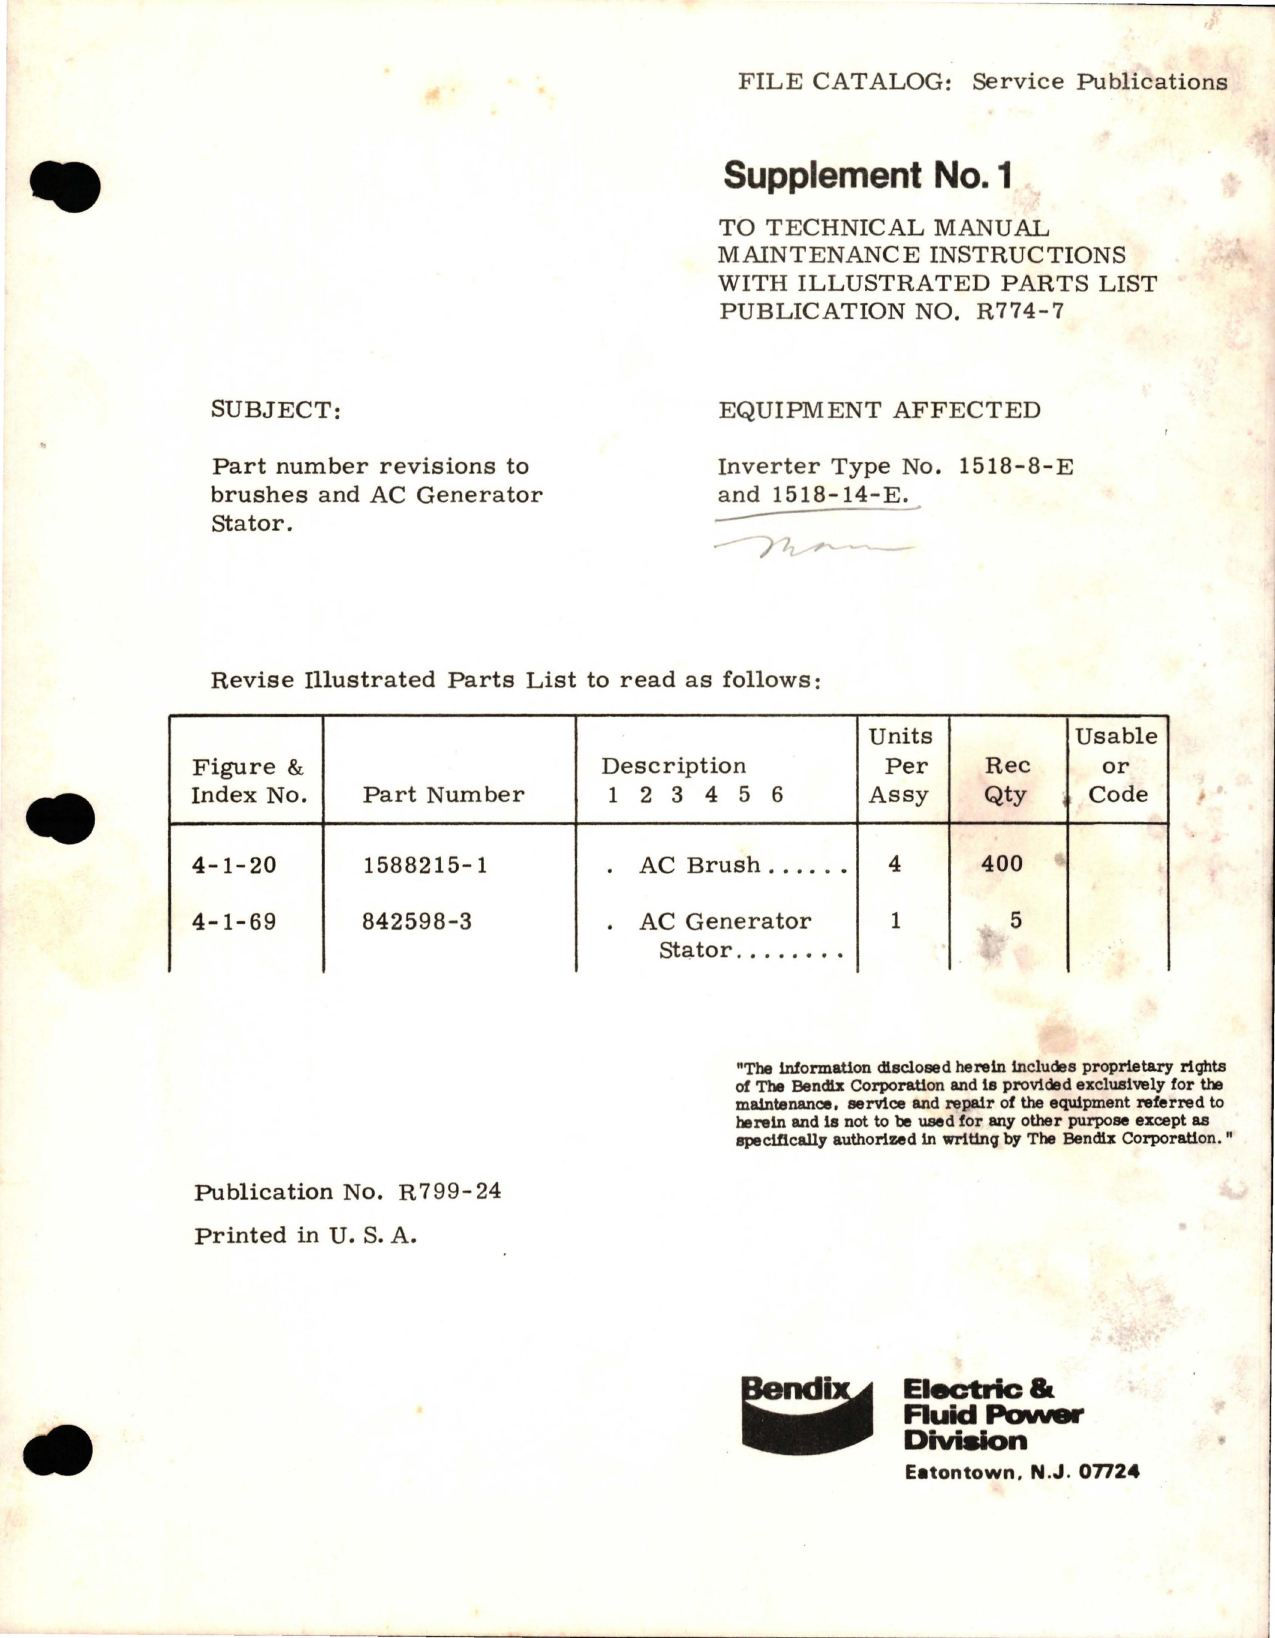 Sample page 1 from AirCorps Library document: Supplement No 1 to Maintenance Instructions with Illustrated Parts List for Inverter - 1518-8-E and 1518-14-E